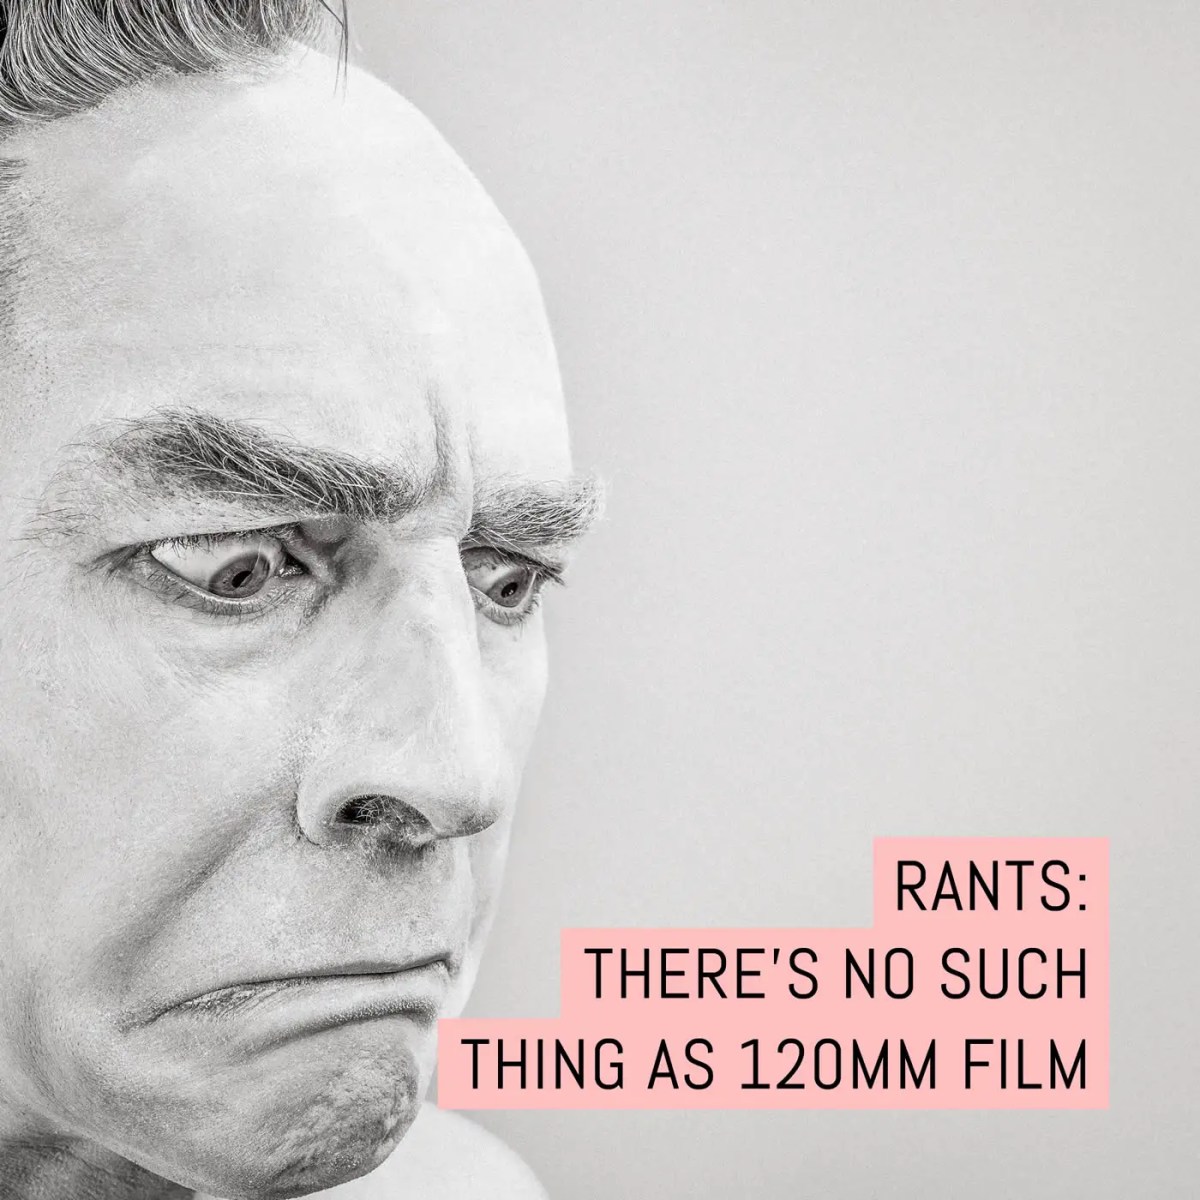 Rants: There's no such thing as 120mm film...